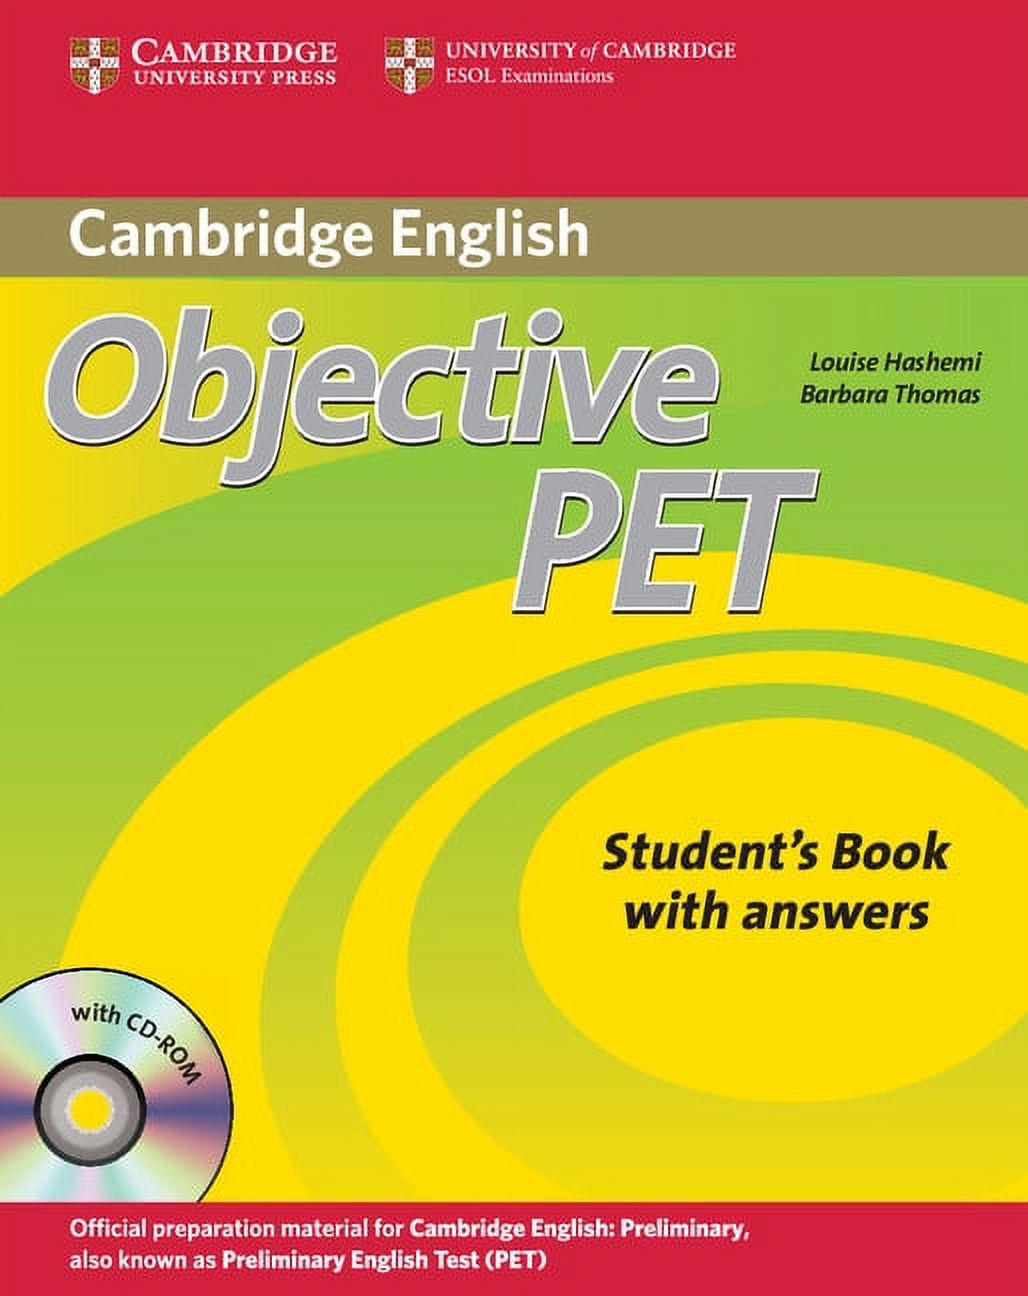 Answers　for　Cambridge　PET　Exams:　(Other)　Book　Books　Student's　Objective　Cambridge　with